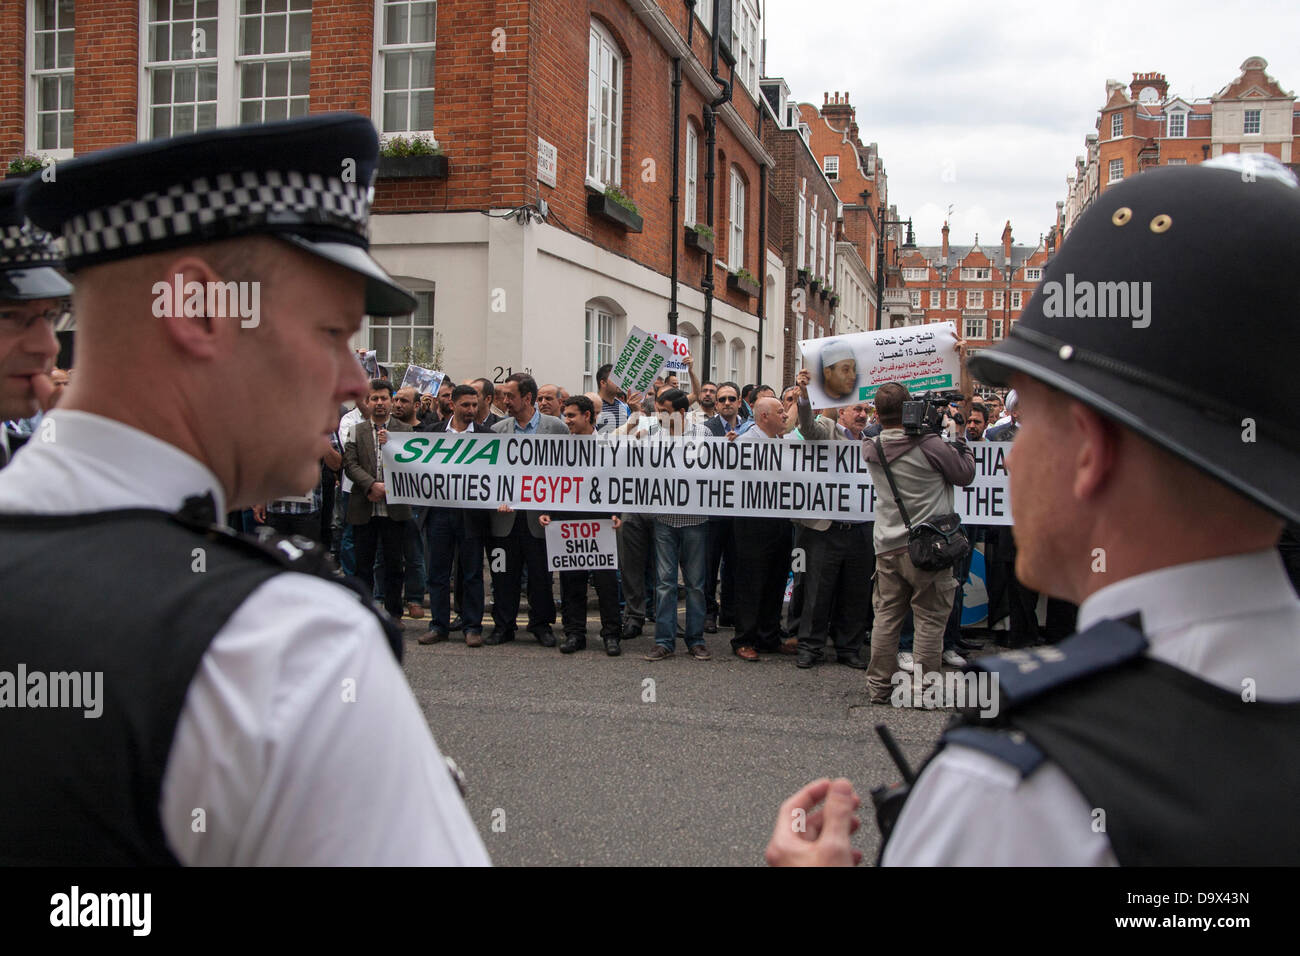 London, UK. 27th June 2013. Police officers look on as Egyptians in London protest against sectarian killings in Egypt. Credit:  Paul Davey/Alamy Live News Stock Photo